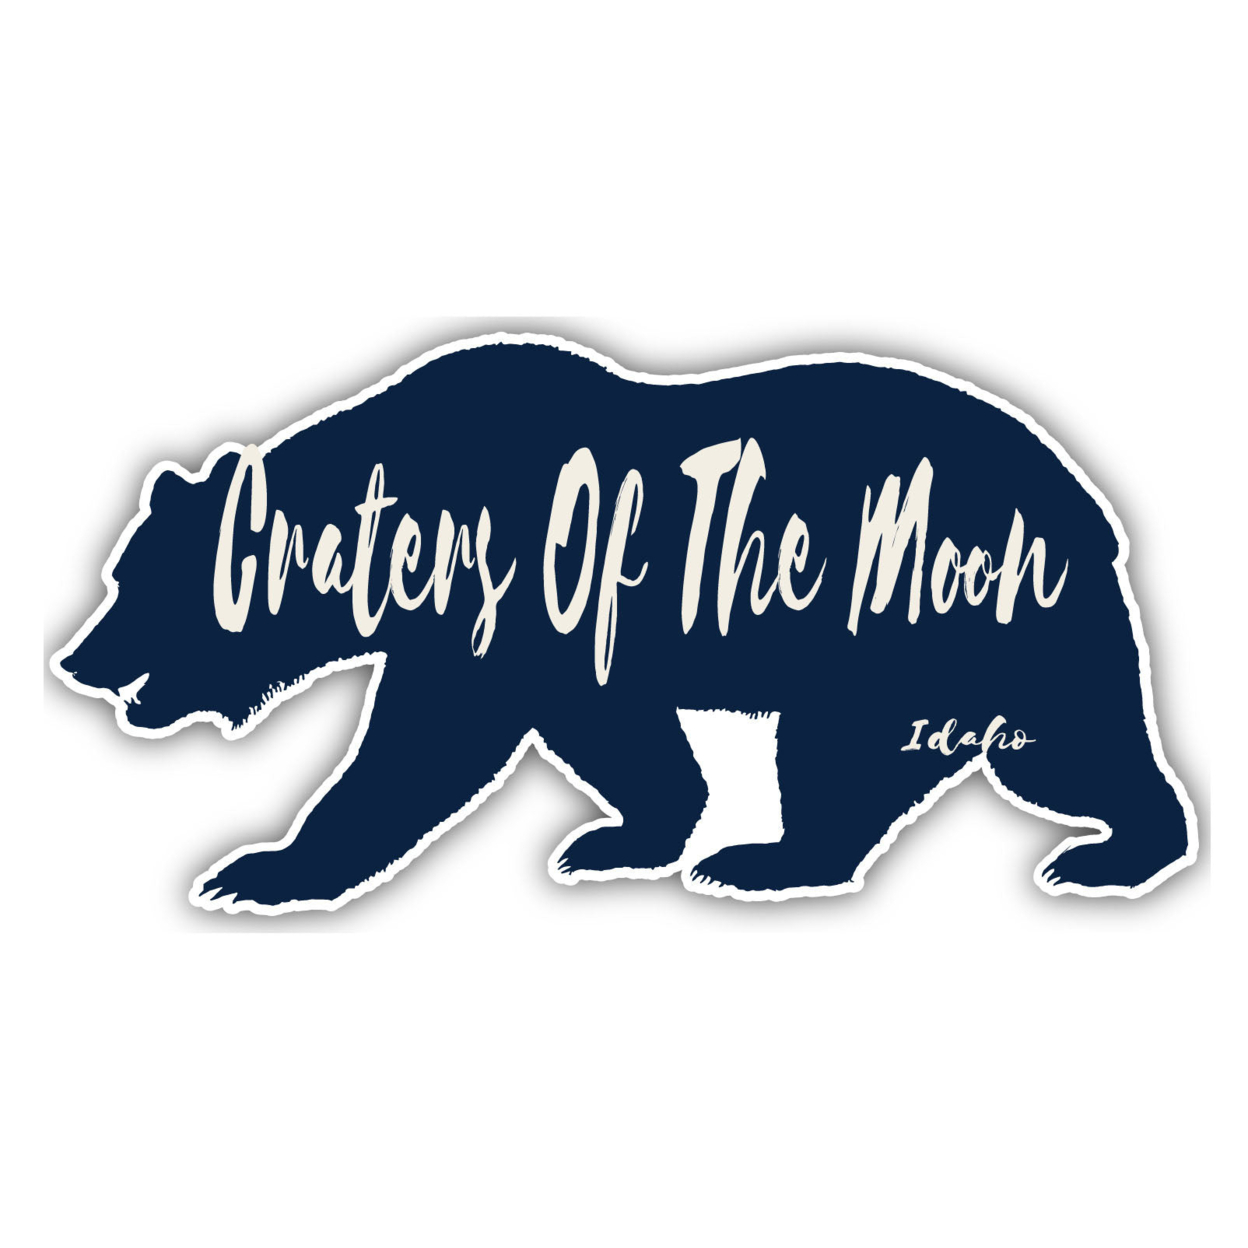 Craters Of The Moon Idaho Souvenir Decorative Stickers (Choose Theme And Size) - Single Unit, 8-Inch, Bear